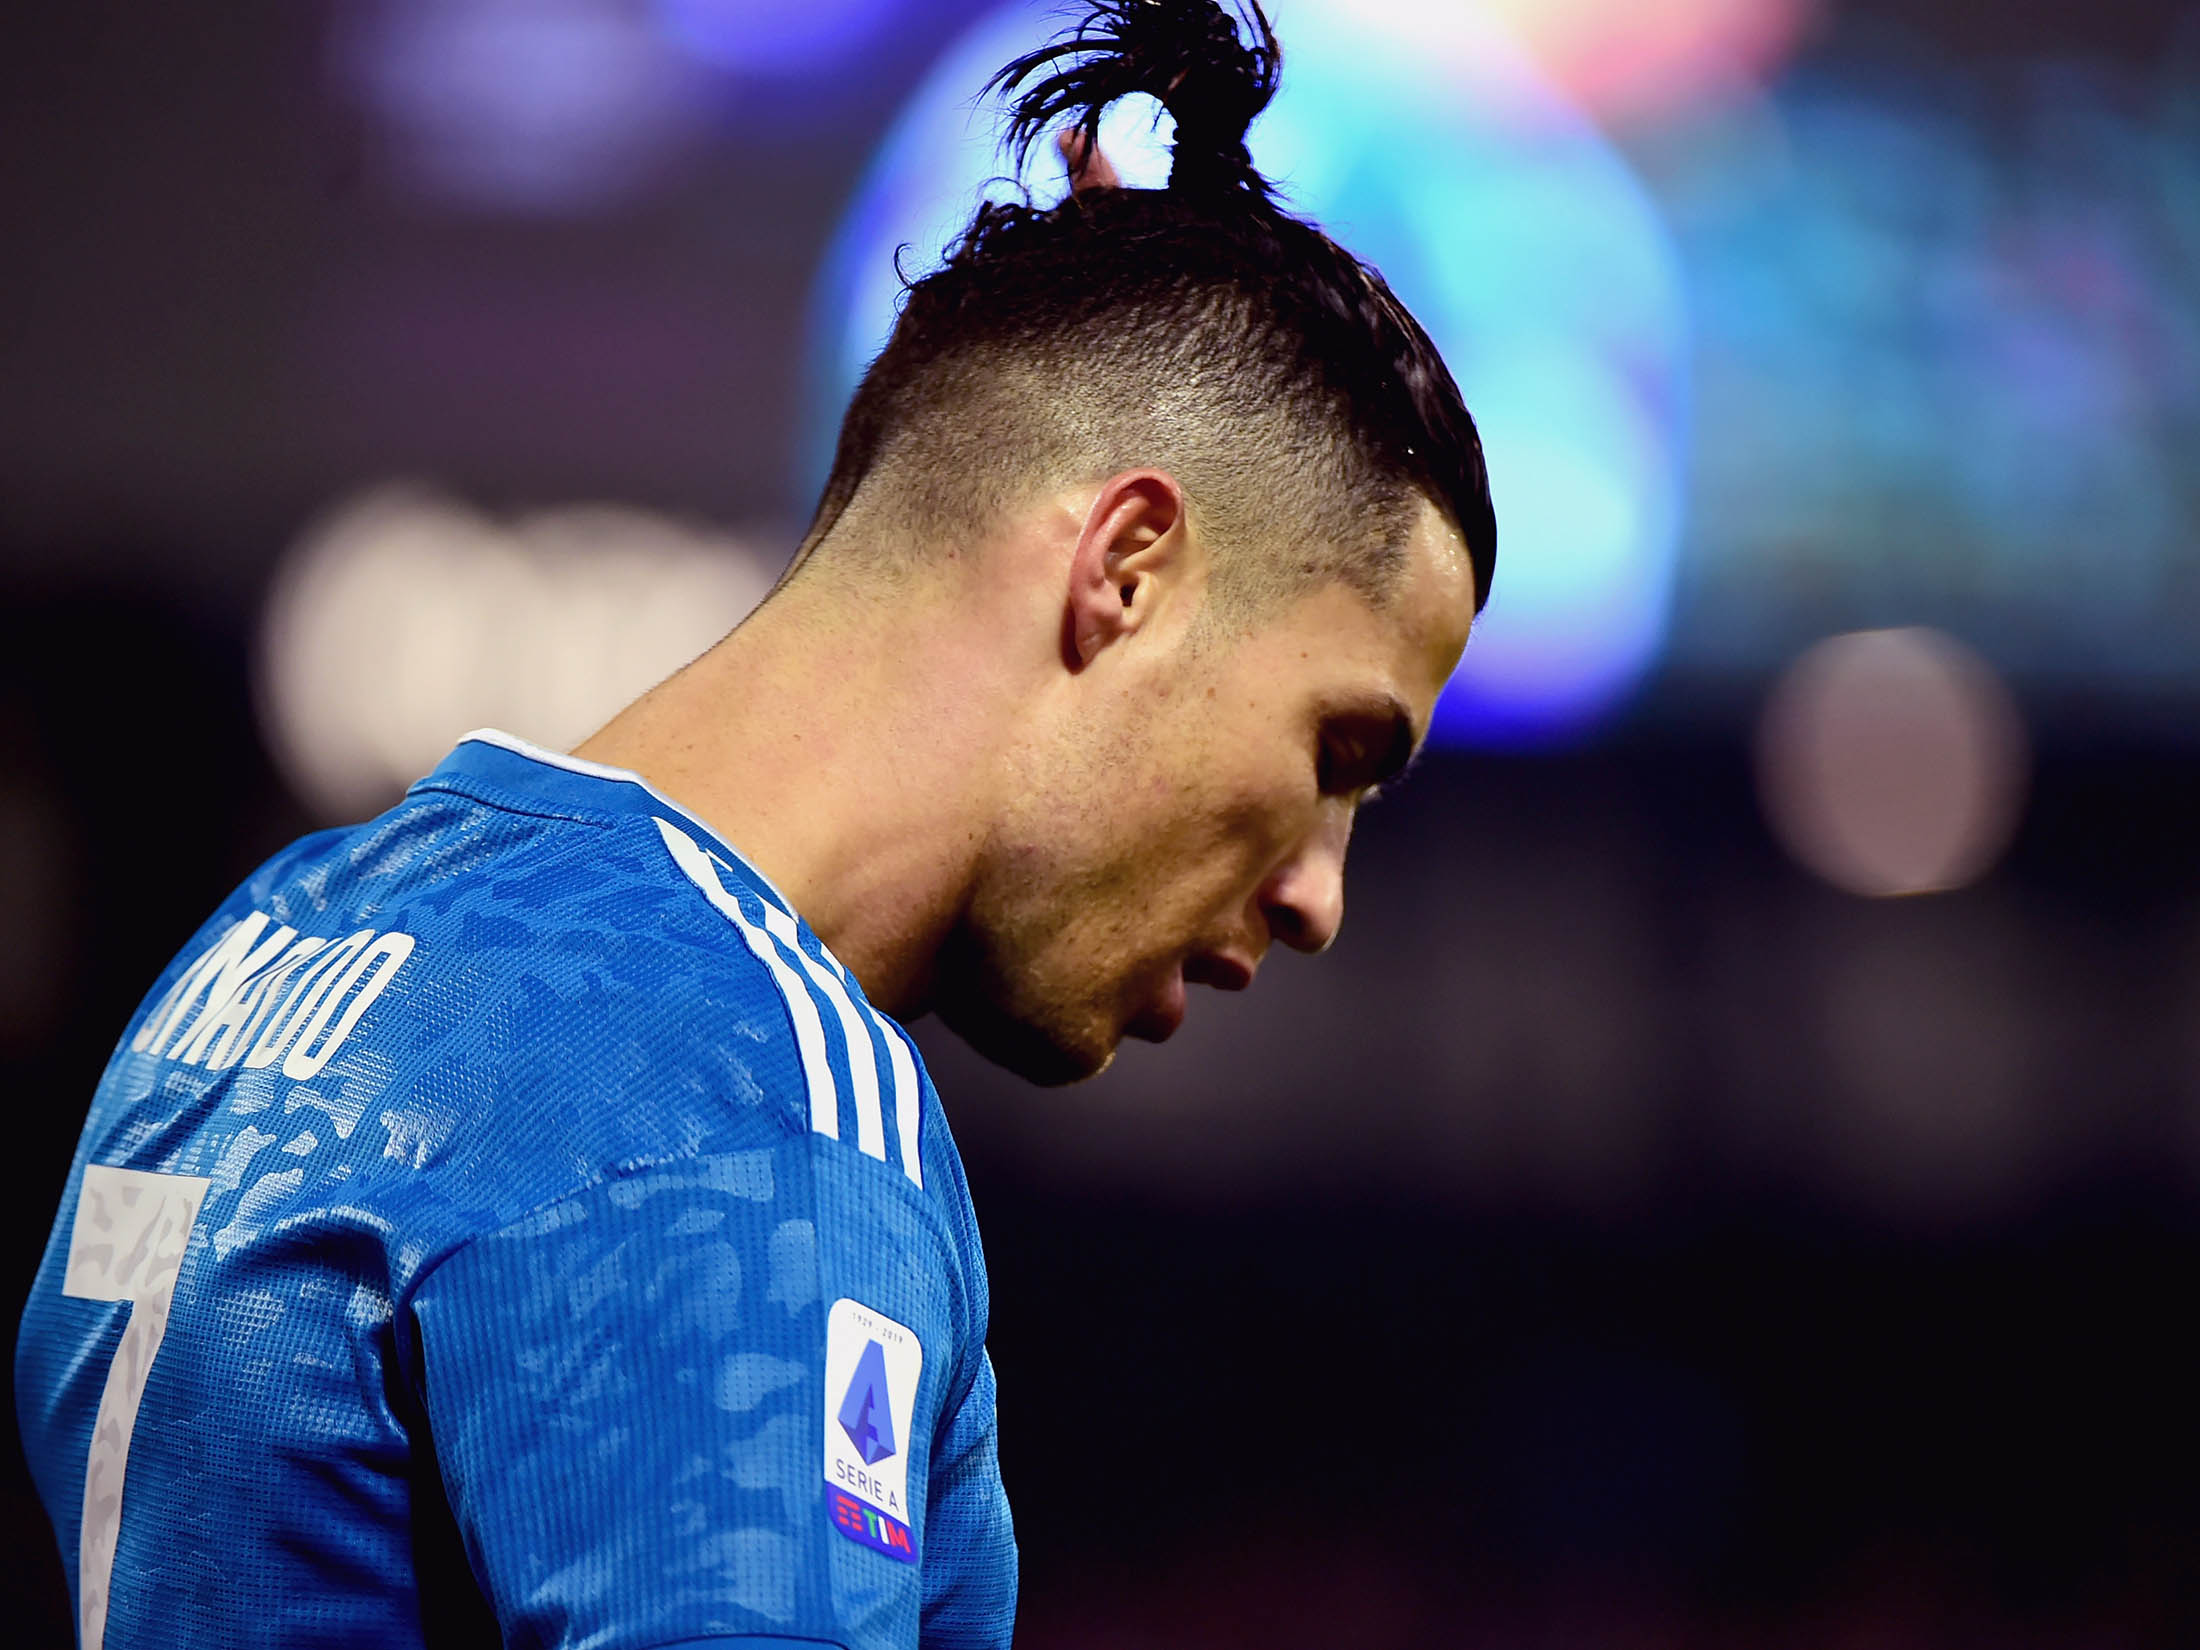 Cristiano Ronaldo - Juventus 19/20 Faces Mod (V1 Ponytail / Top Knot) for  FIFA 23 PC (Members Request/Order) * Mod Available on my Patre... |  Instagram